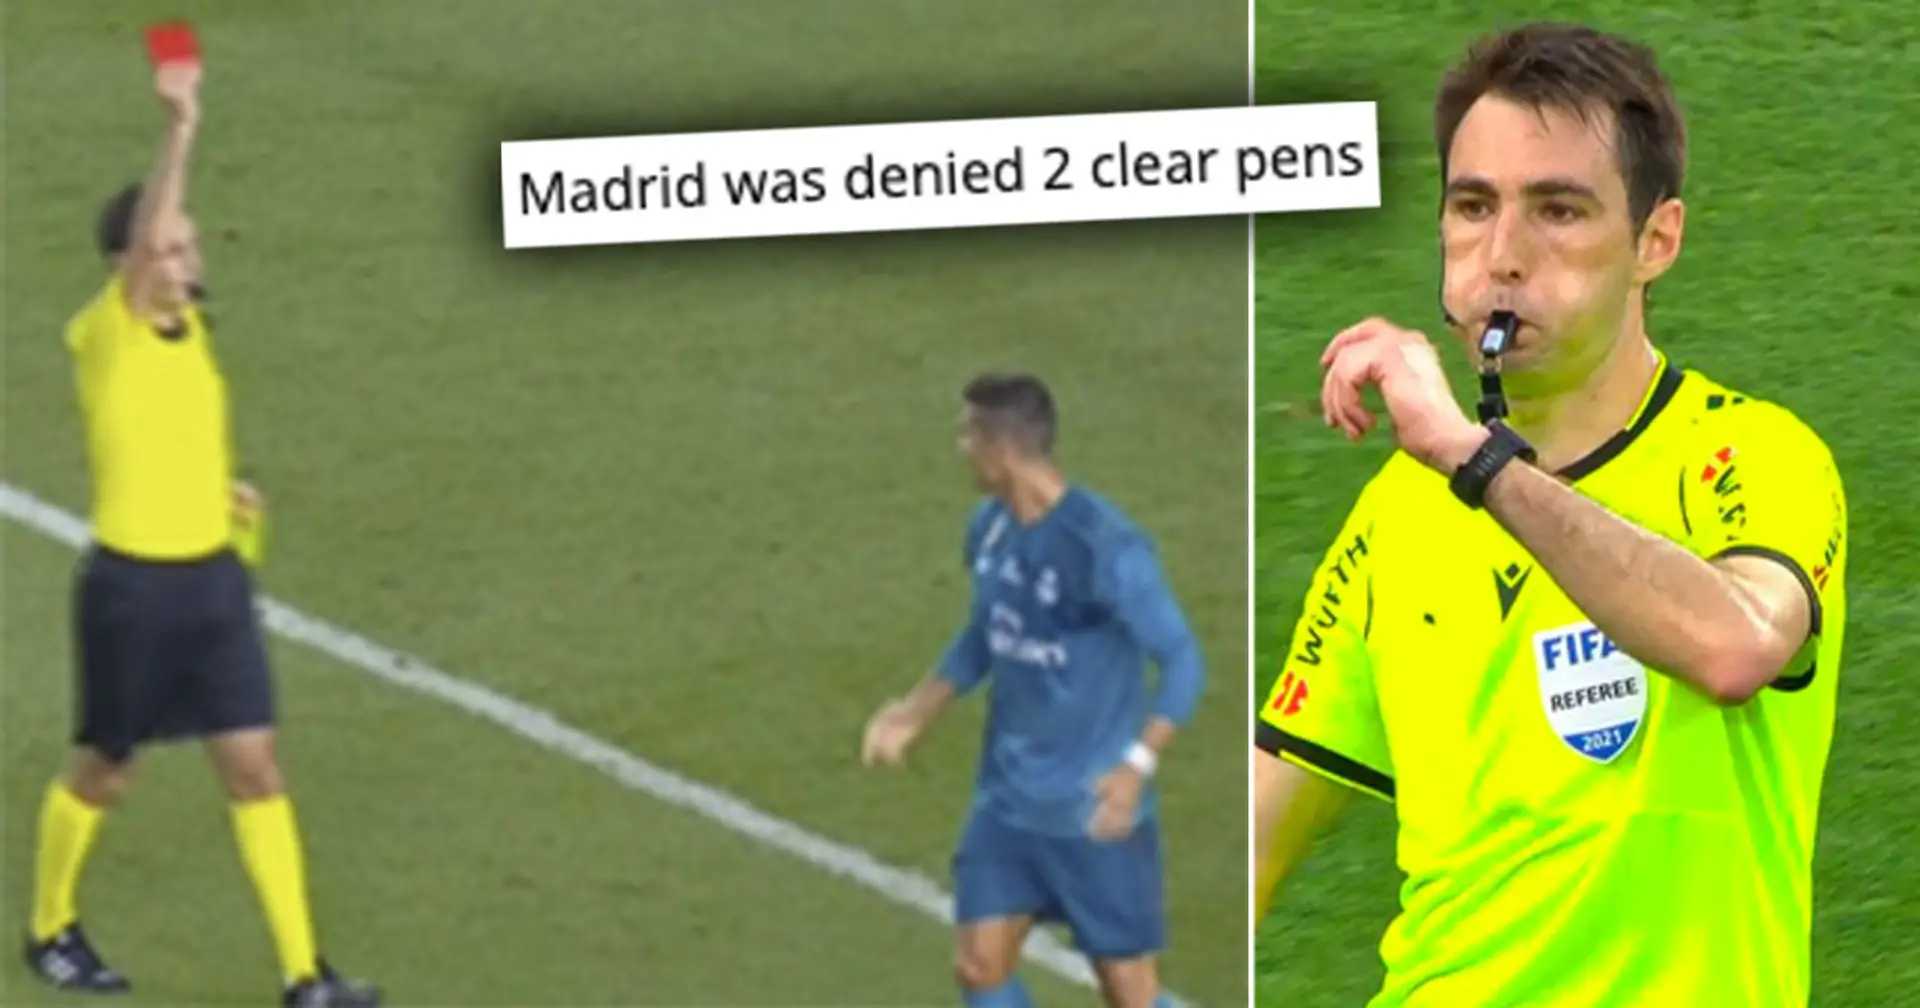 'The dude is worse than Mateu Lahoz': Madridistas react as El Clasico referee announced